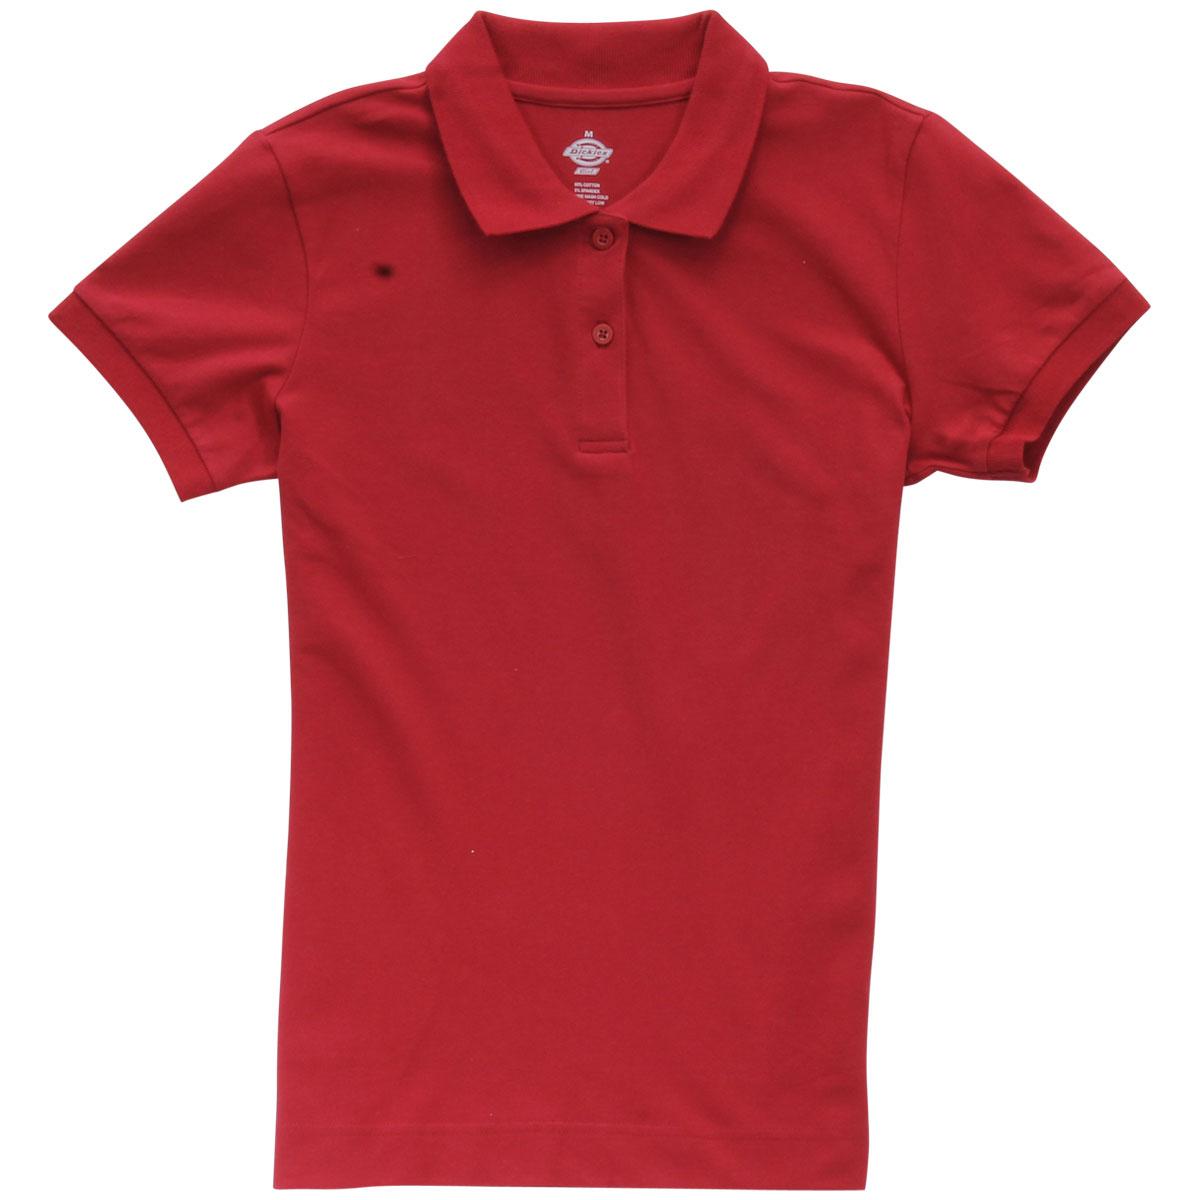 Dickies Girl Junior's 2 Button Short Sleeve Stretch Pique Polo Shirt - Red - X Large